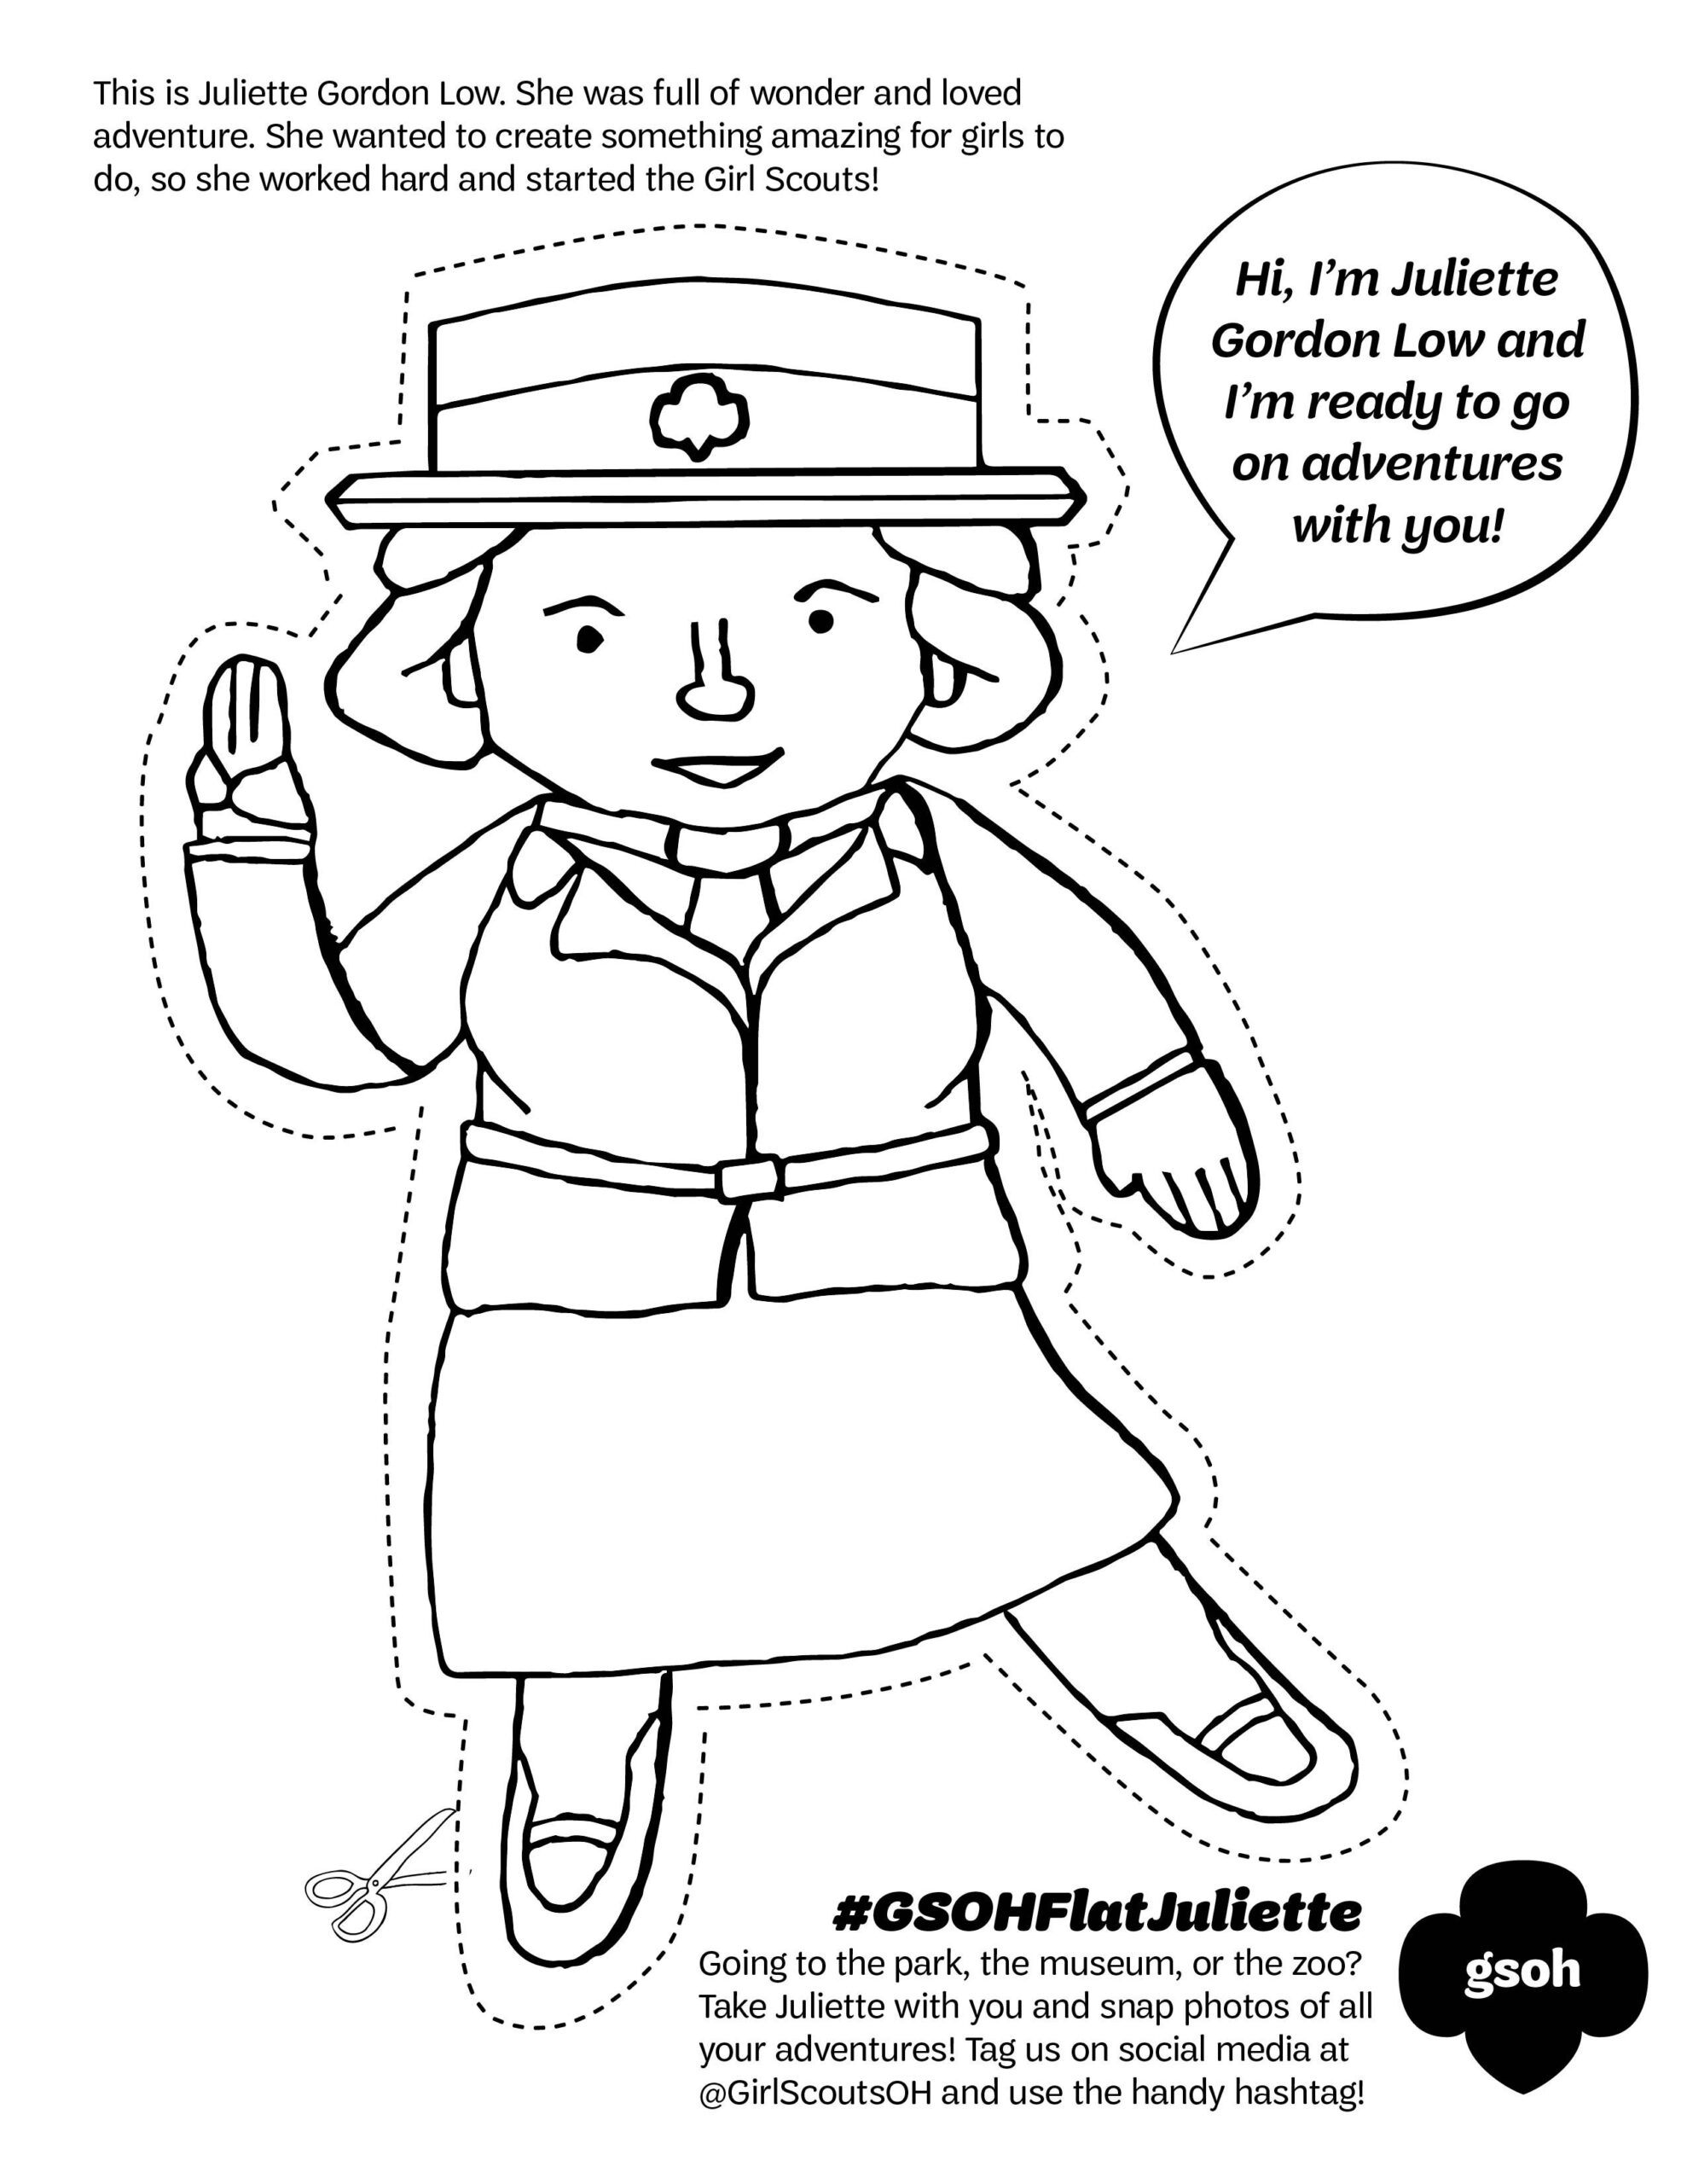 We Love This Flat Juliette Coloring Page From GS Of Ohio s Heartland Cut Her Out And Take Her On Your G Girl Scouts Girl Scout Camping Girl Scout Activities